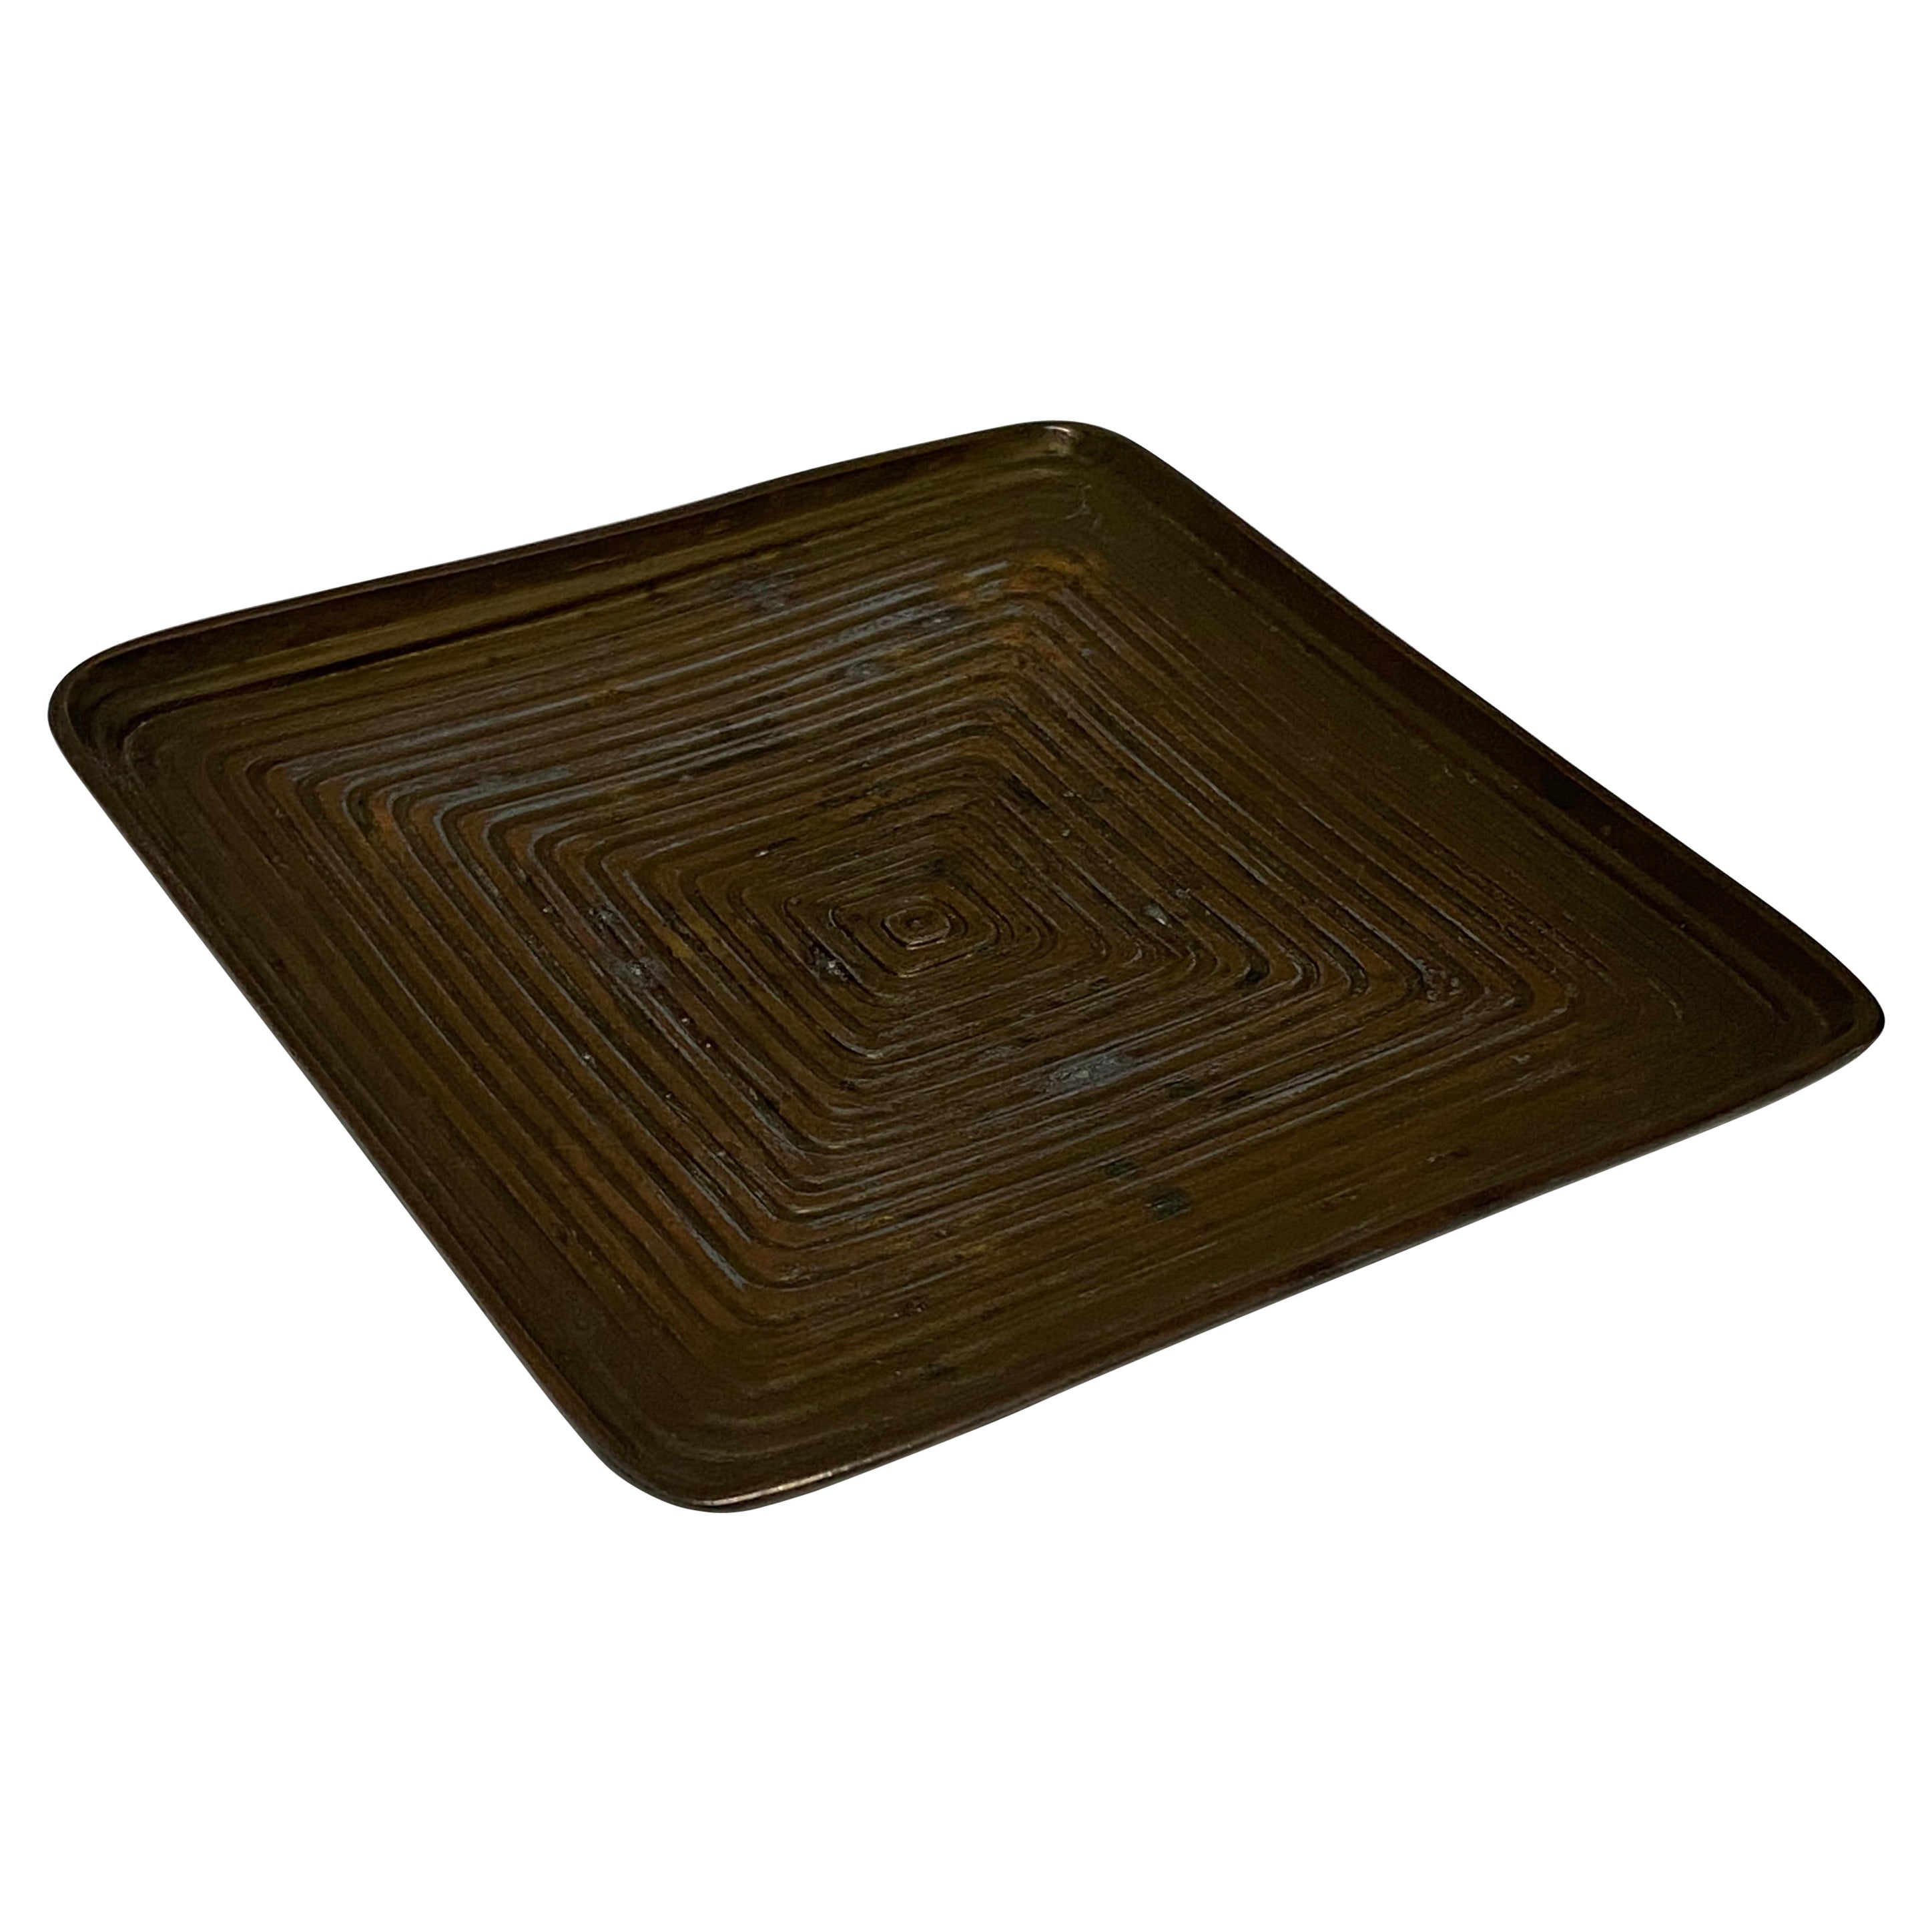 Ben Seibel Jenfred Concentric Square Tray For Sale